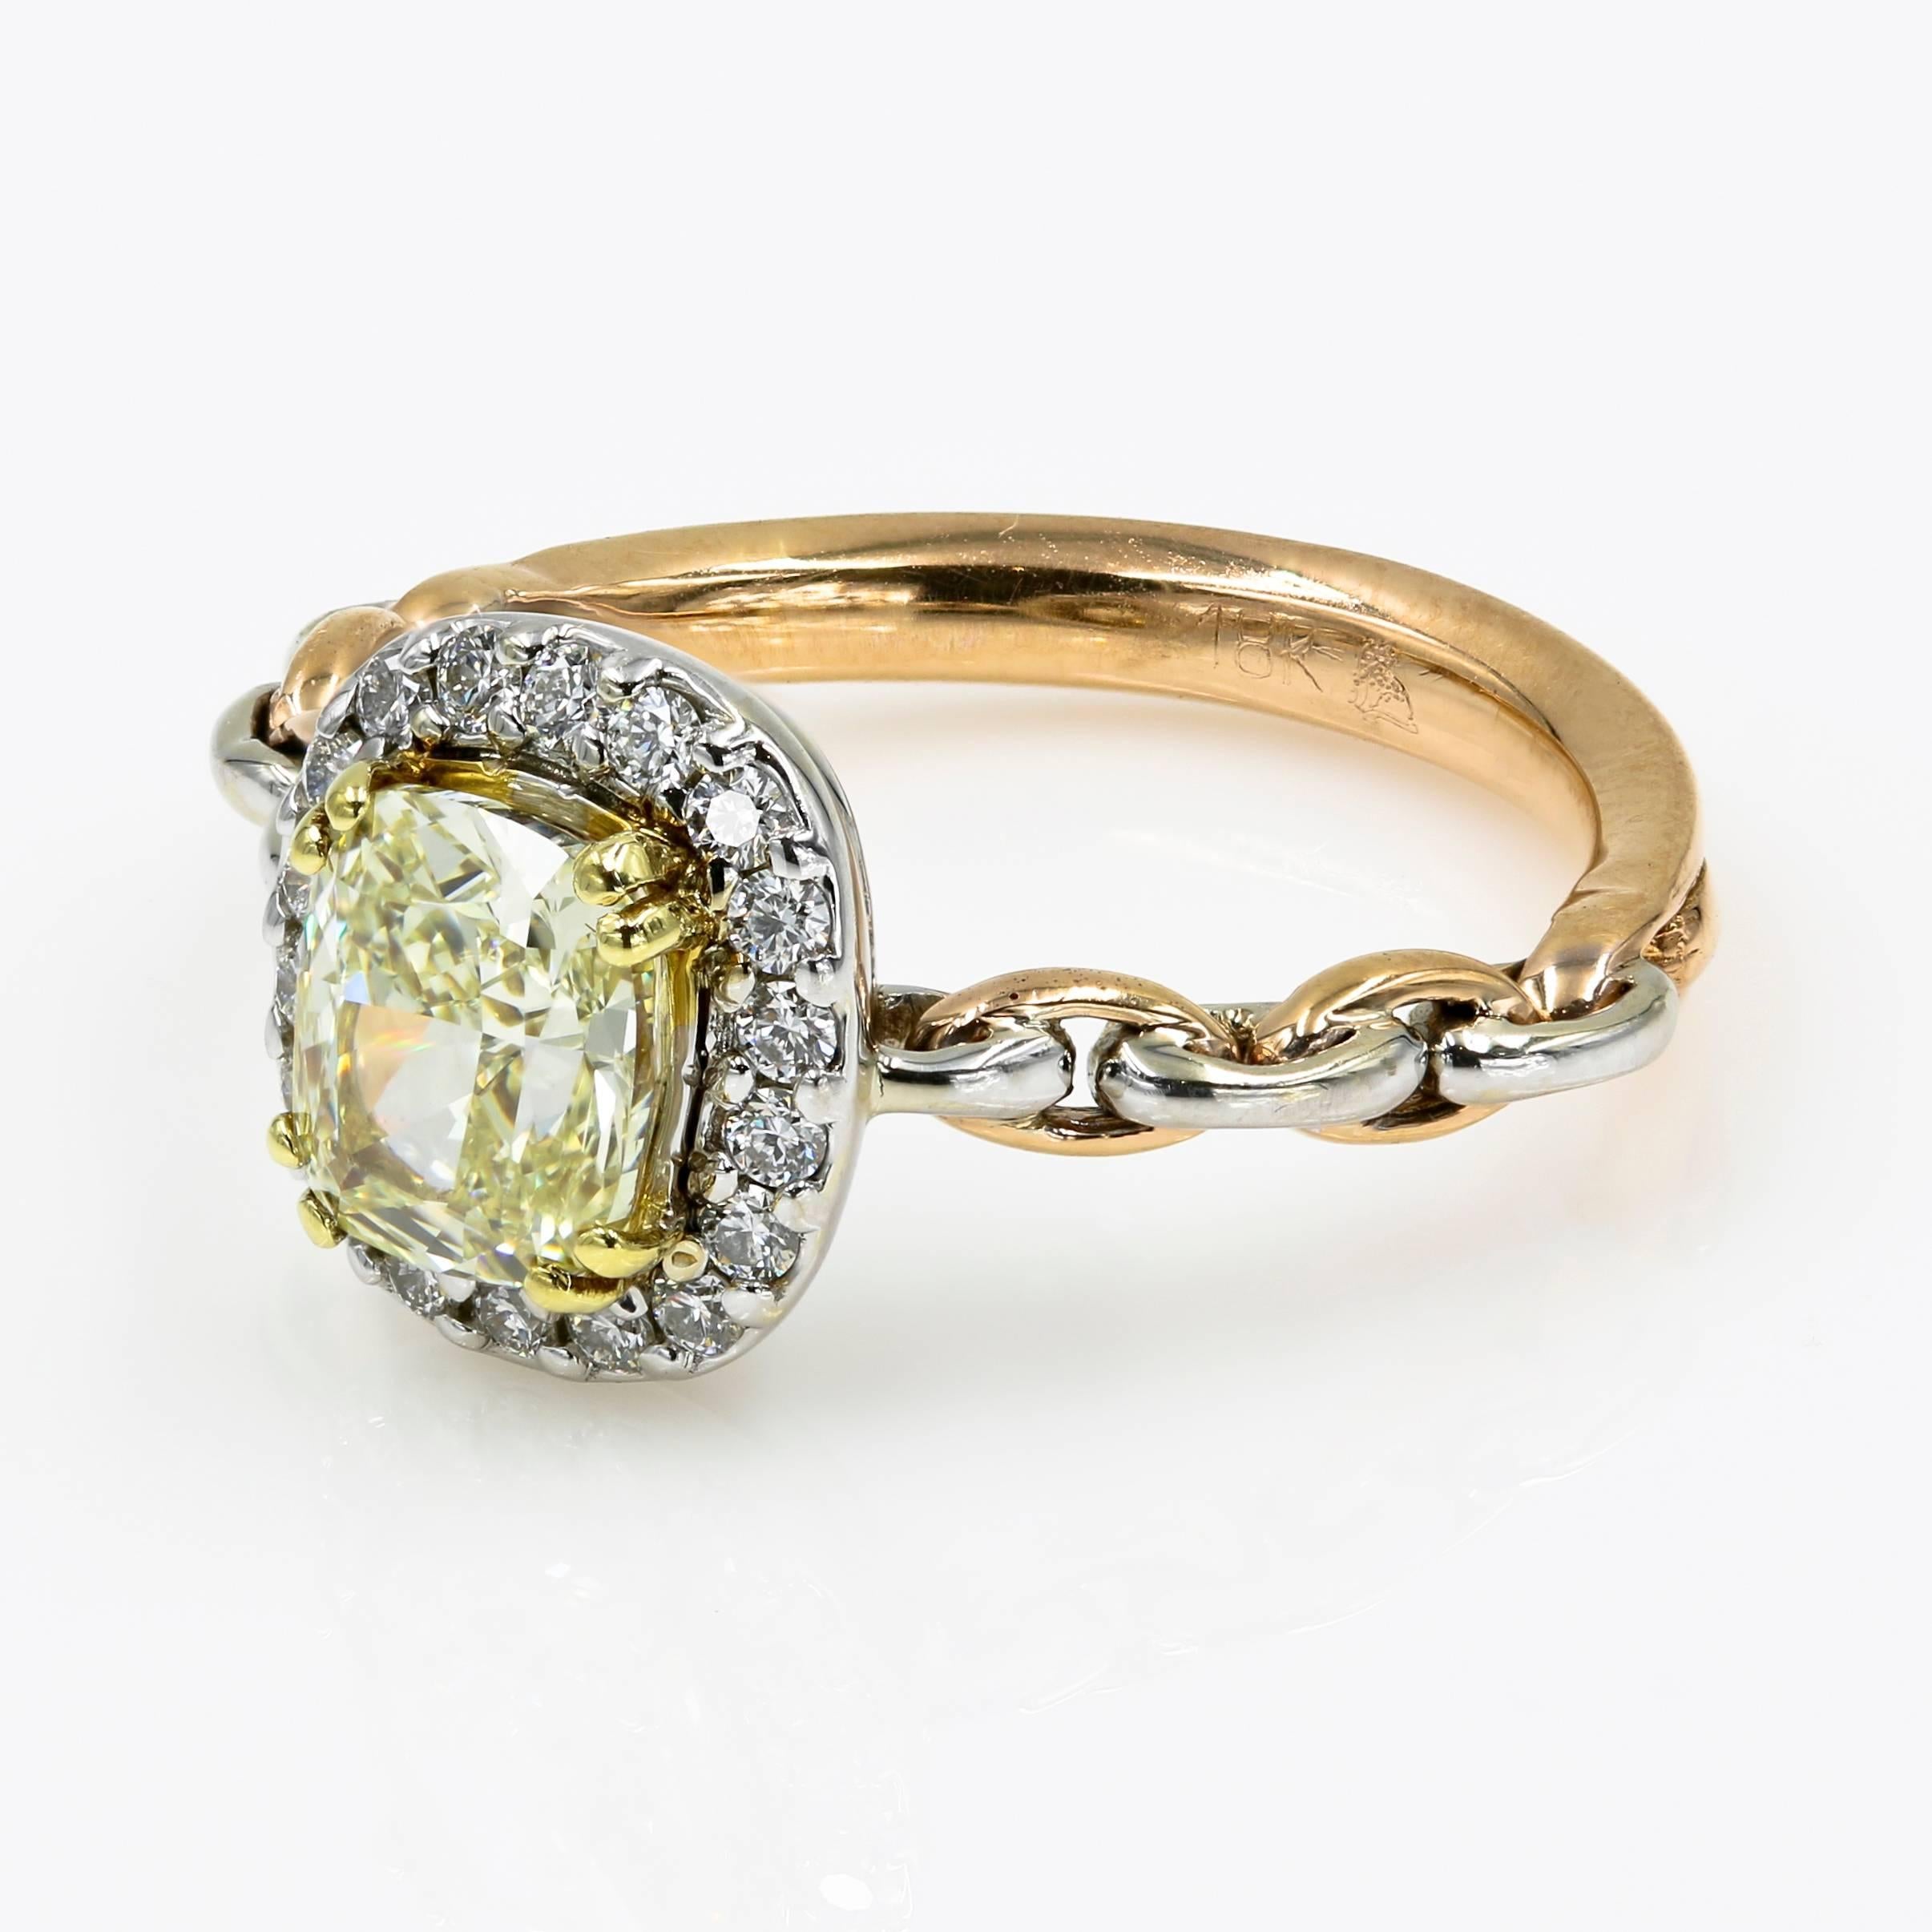 Elegant Chardonnay Diamond® ring with 1.30cts. cushion cut center diamond is W-X color and VS1 clarity. The diamond has a unique serial number on the girdle and the Chardonnay Diamond® Logo. The stone is set in 18kt. yellow, rose & white gold with